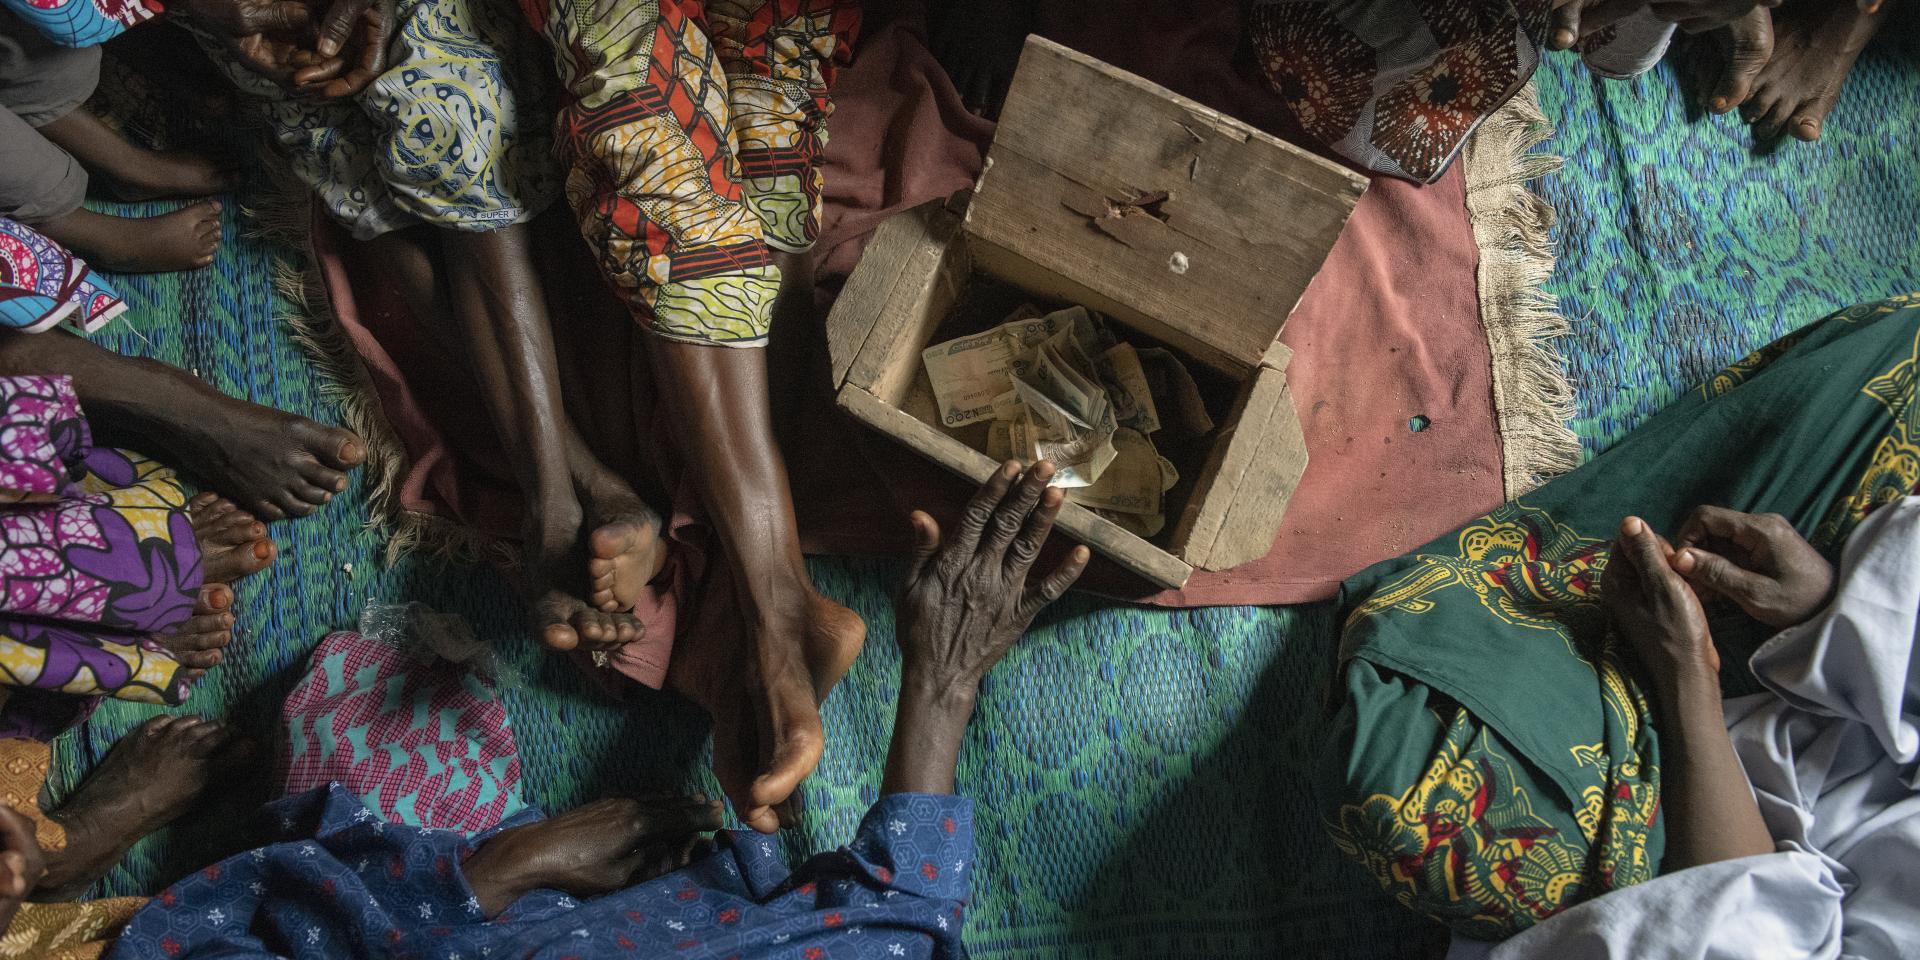 Women's hands place money into a shared savings box made of wood on a floor covered in blankets